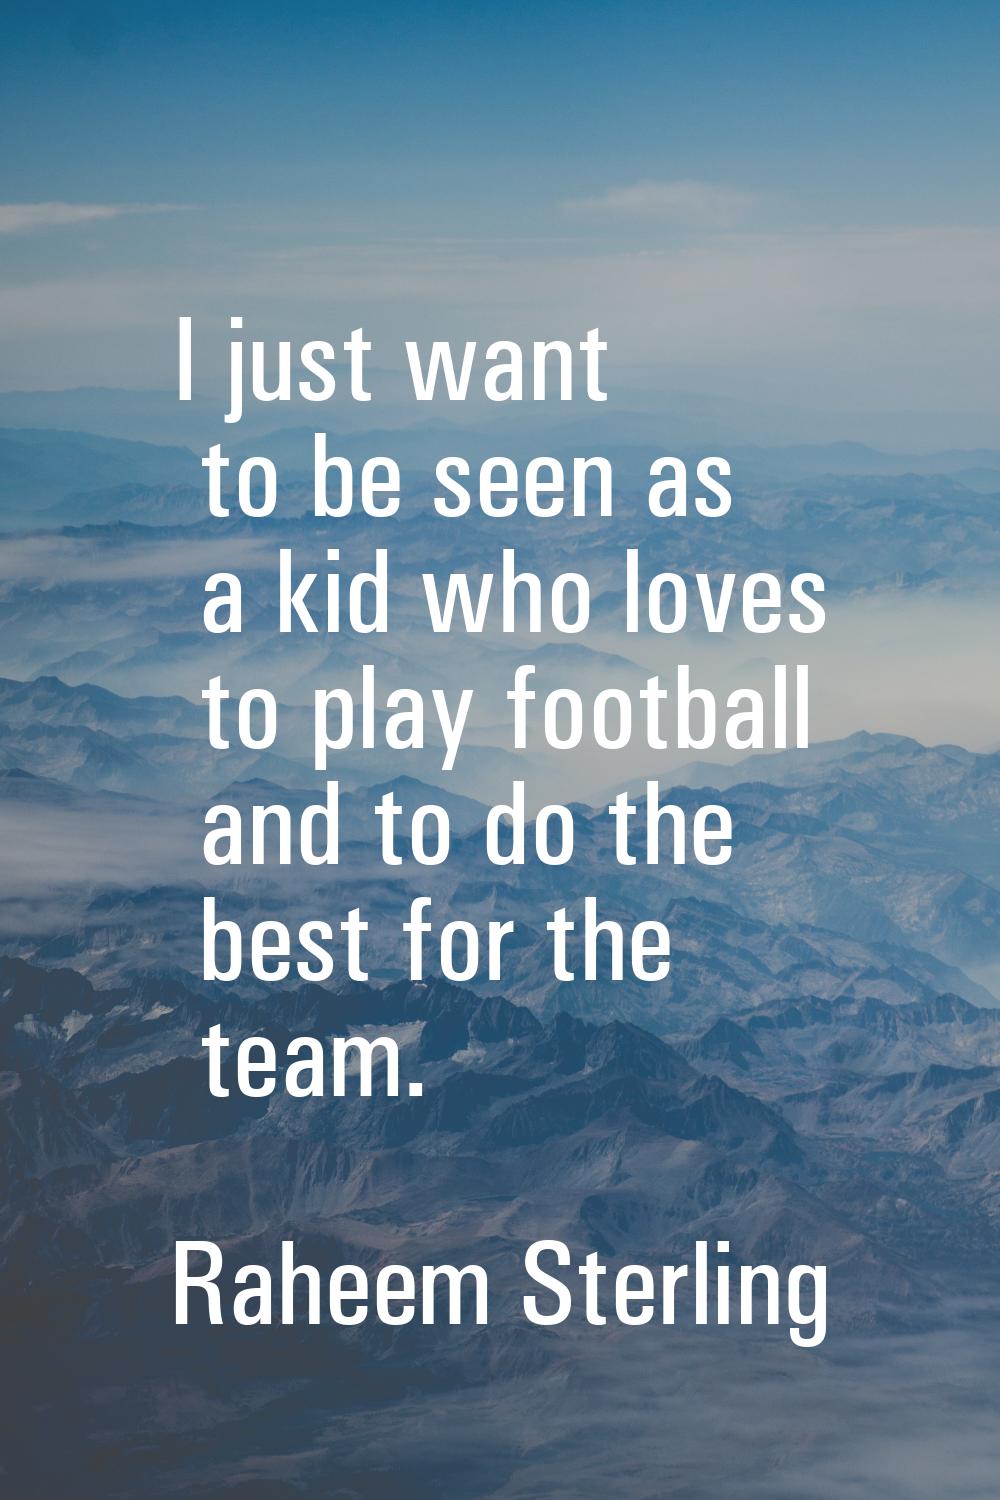 I just want to be seen as a kid who loves to play football and to do the best for the team.